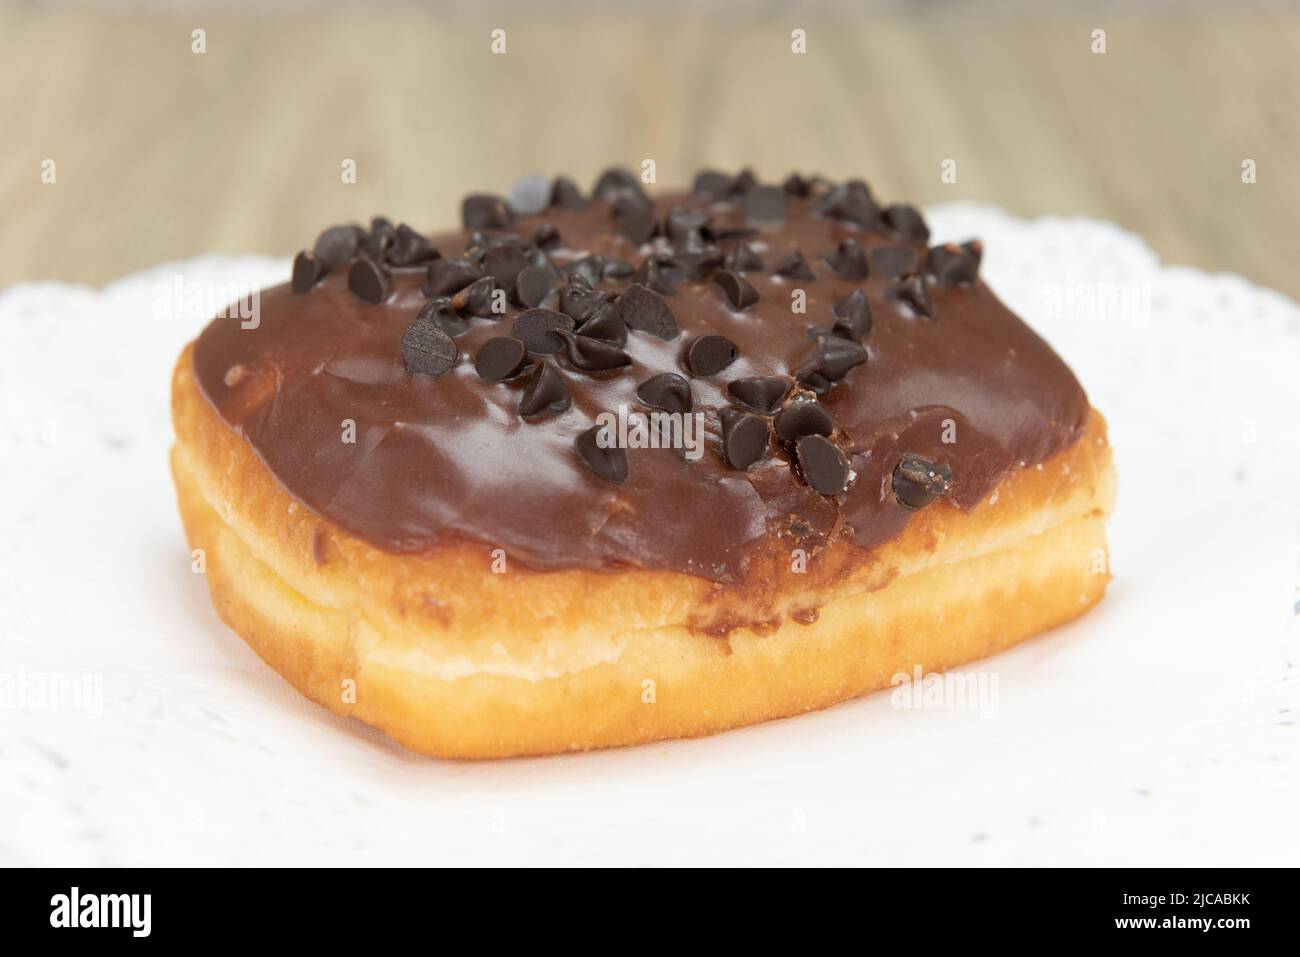 Tempting fresh from the oven chocolate chocolate chip donut from the bakery served on a plate. Stock Photo